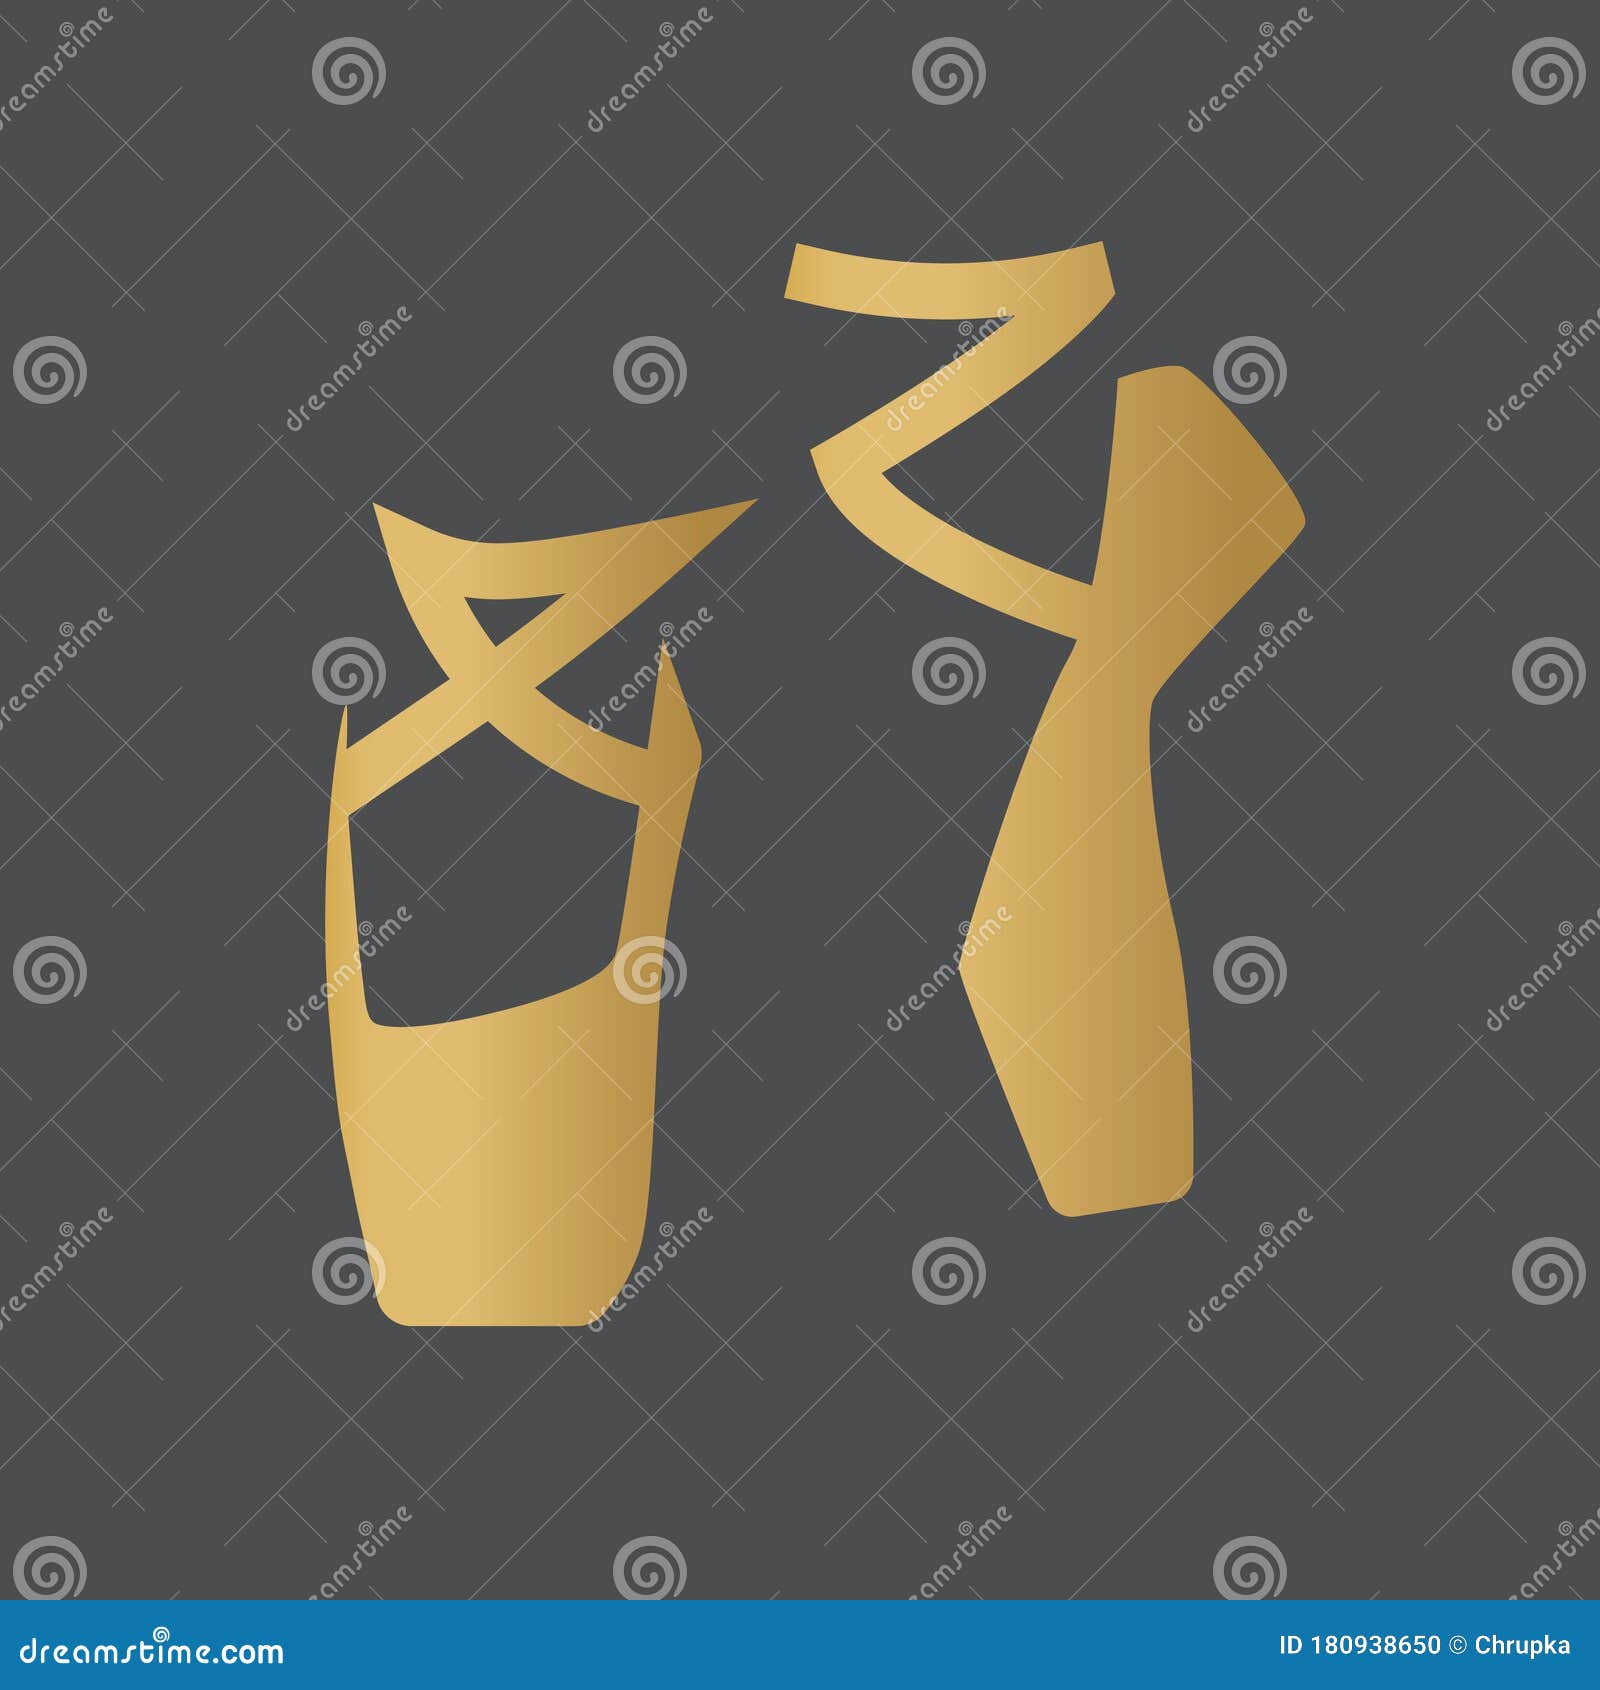 20 Red Bottom Shoes Dance Images, Stock Photos, 3D objects, & Vectors